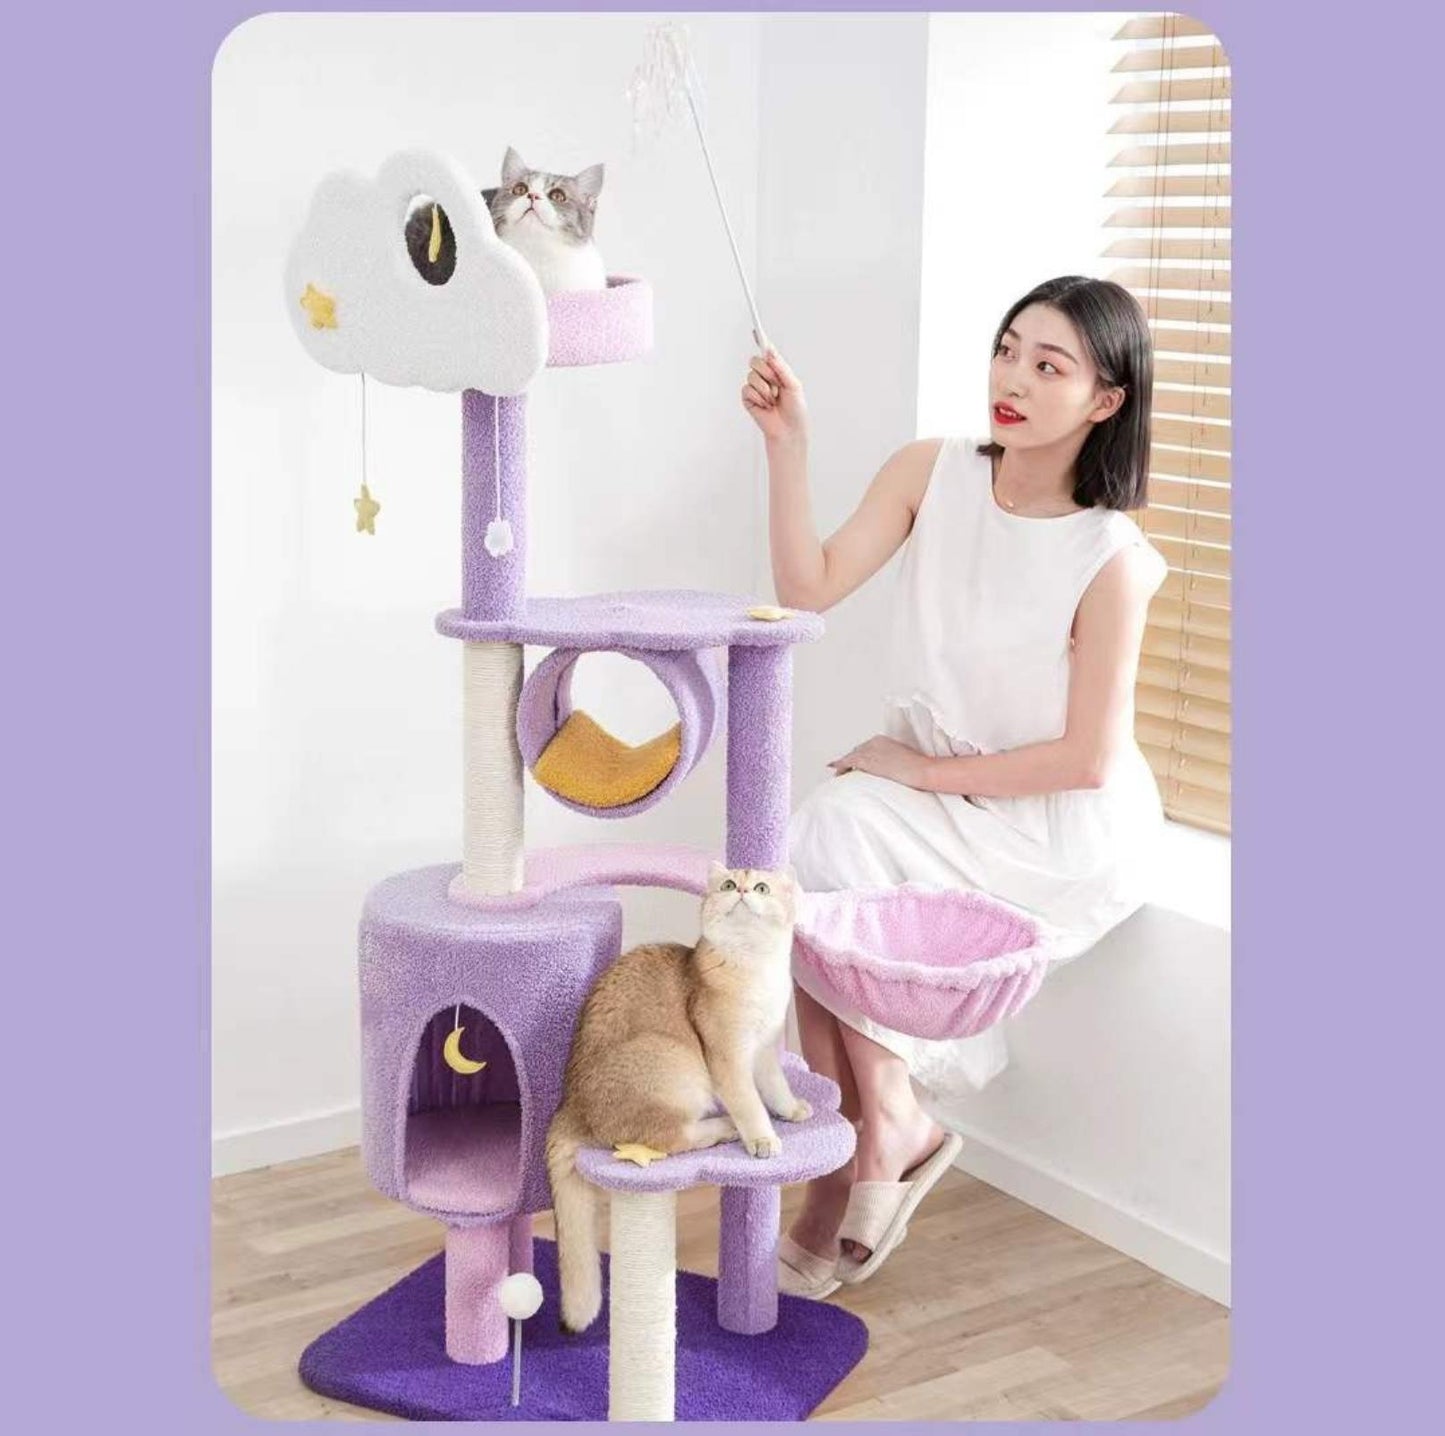 Fantasy Series Climbing Frame Cat Tree - Sparkling and cloudy - {{product.type}} - PawPawUp